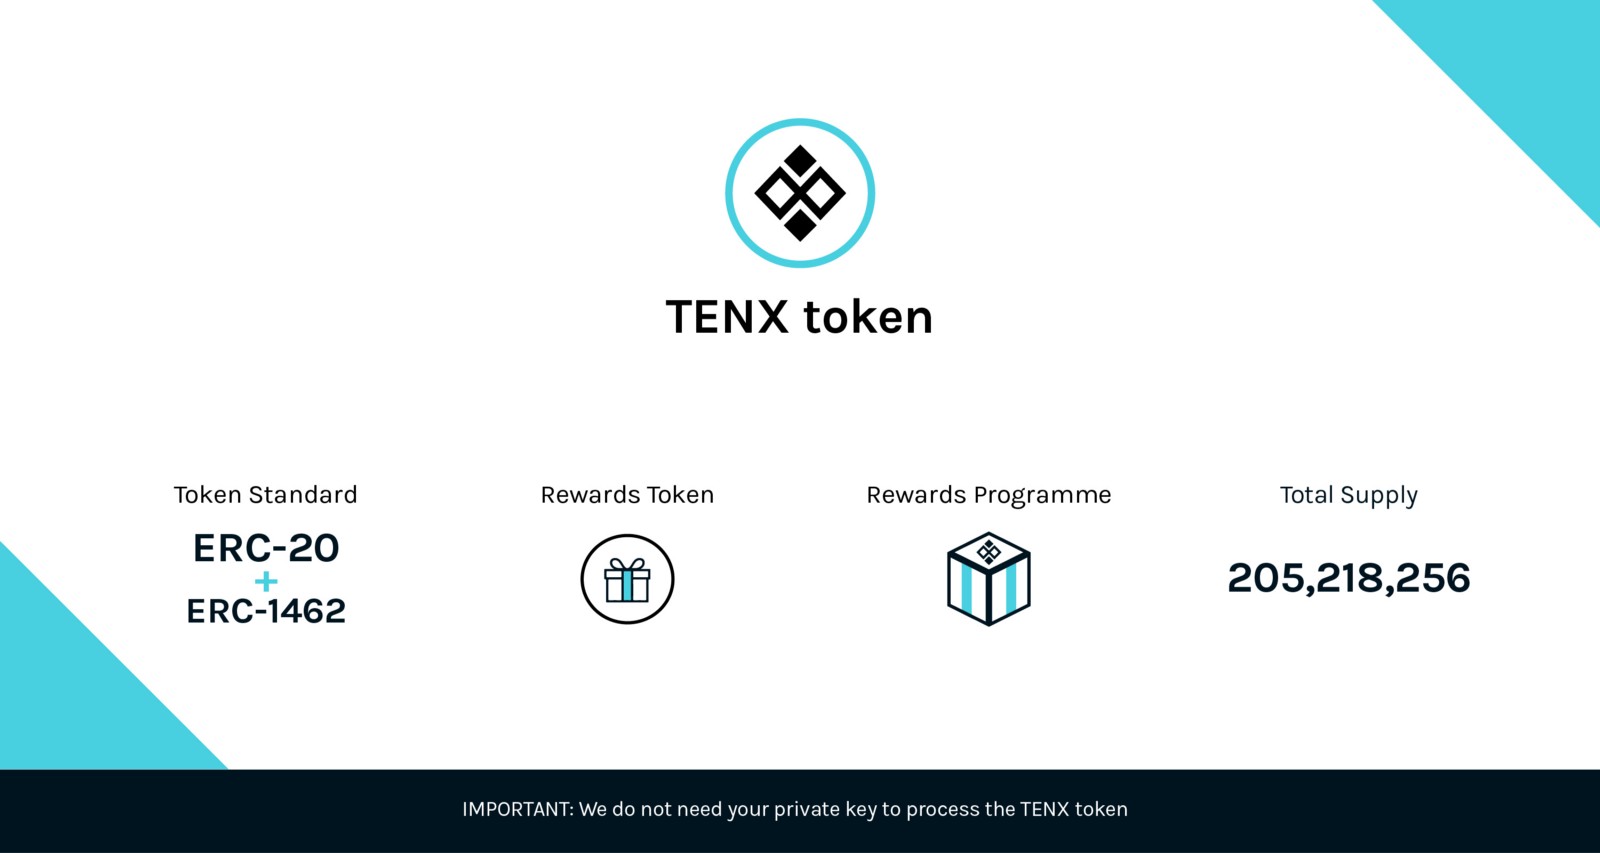 How To Get Ethereum Holding Tenx In My Ether Wallet Historical Data - 